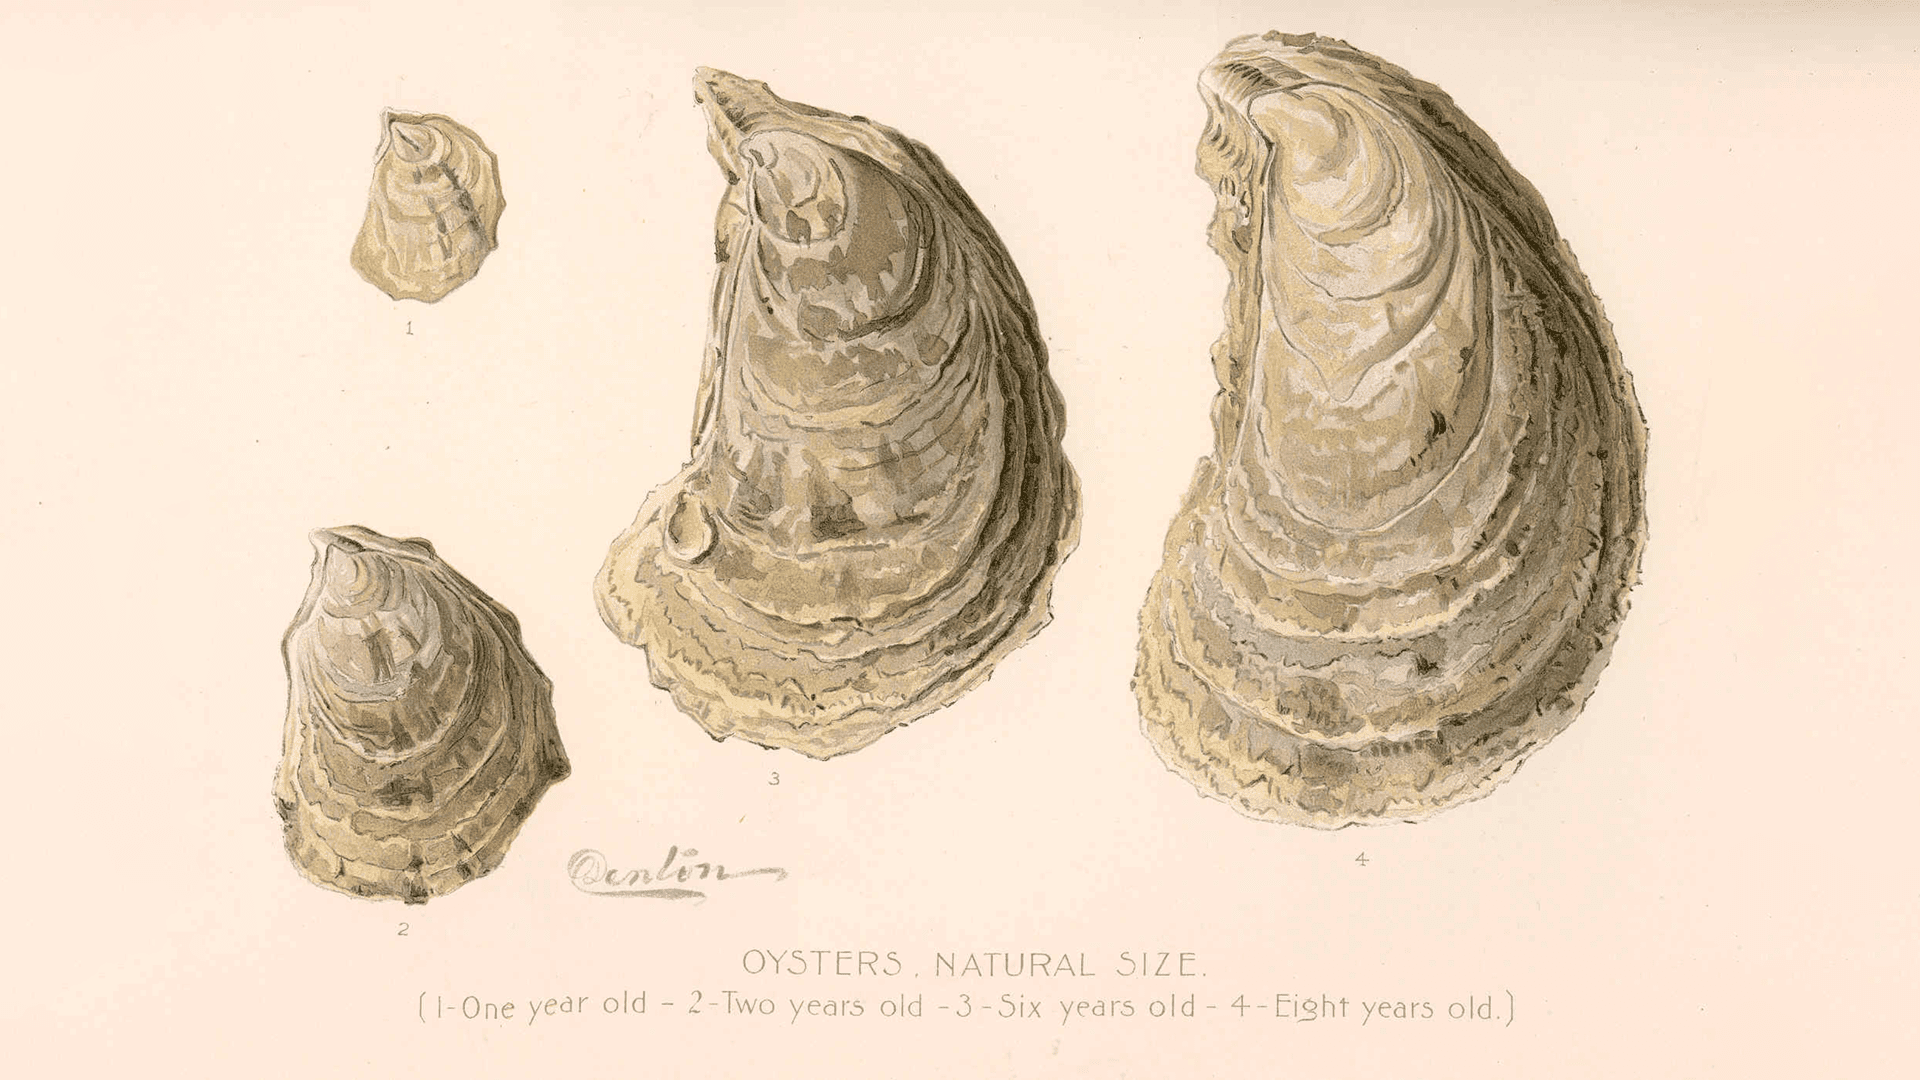 "Oysters," Second Annual Report of the Commissioners of Fisheries, Game and Forests of the State of New York, Printed by Wynkoop Hallenbeck Crawford Company, 1896.